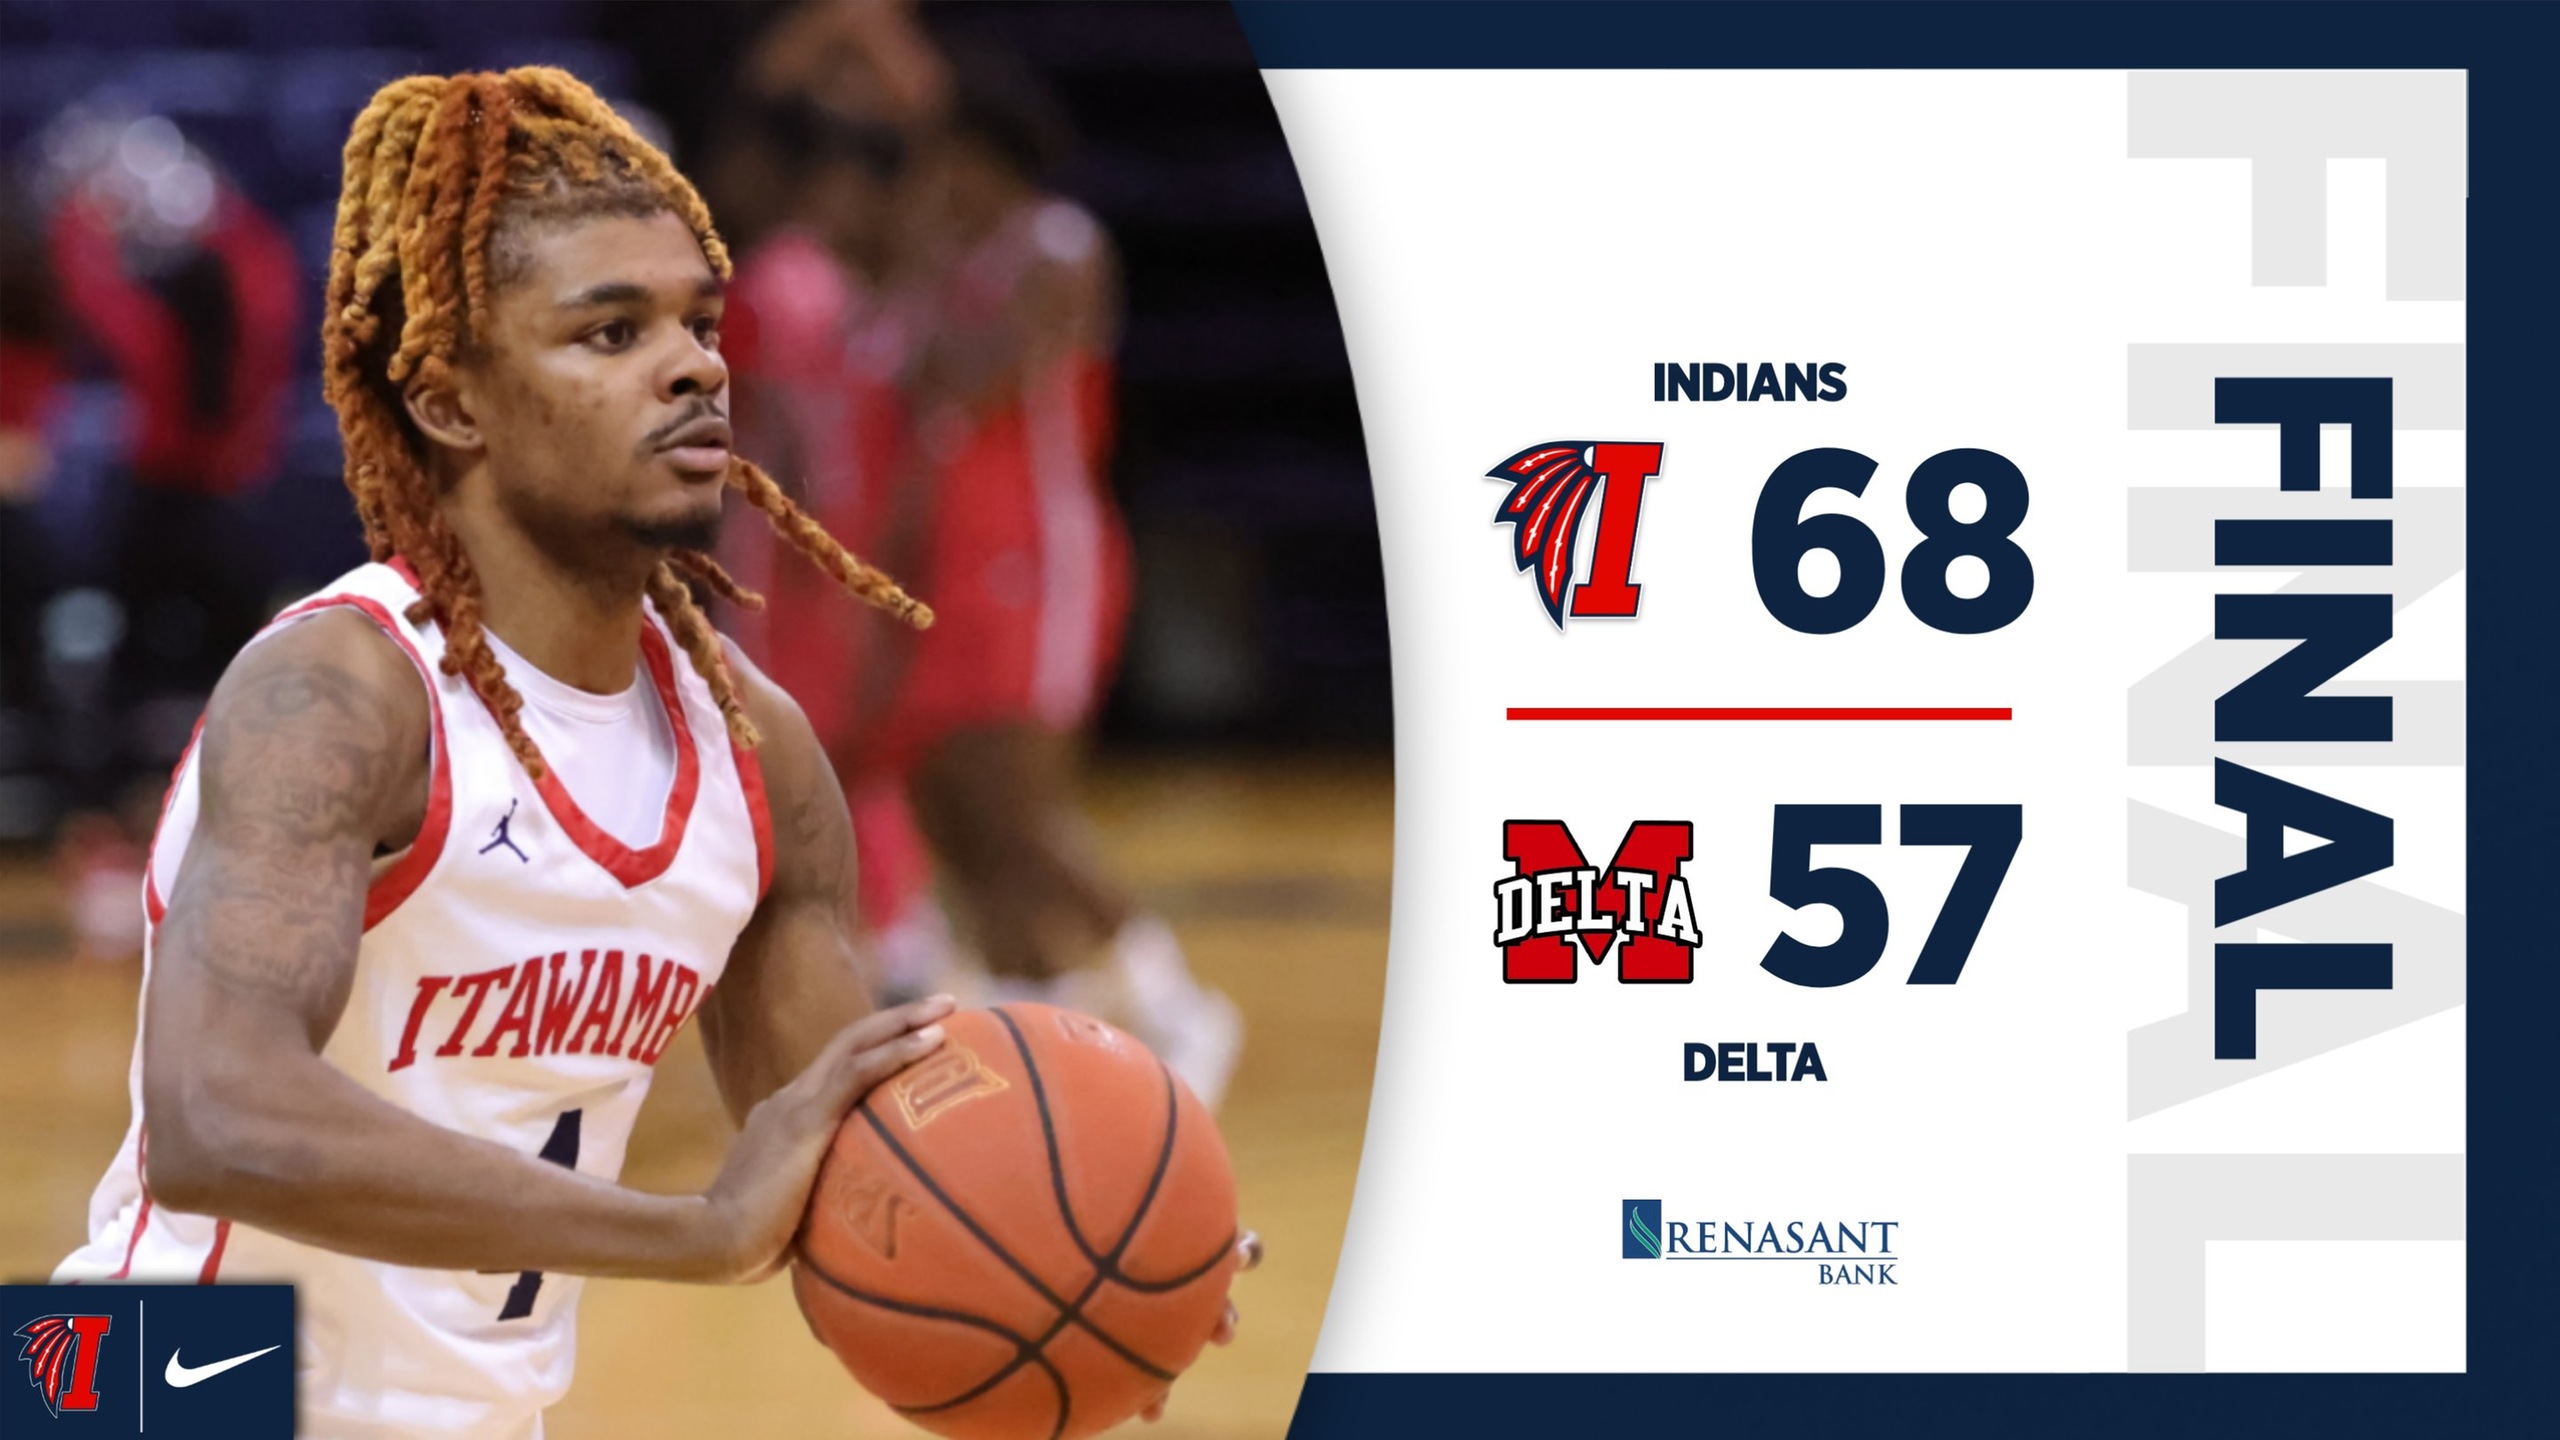 Indians earn first conference win over Delta, 68-57